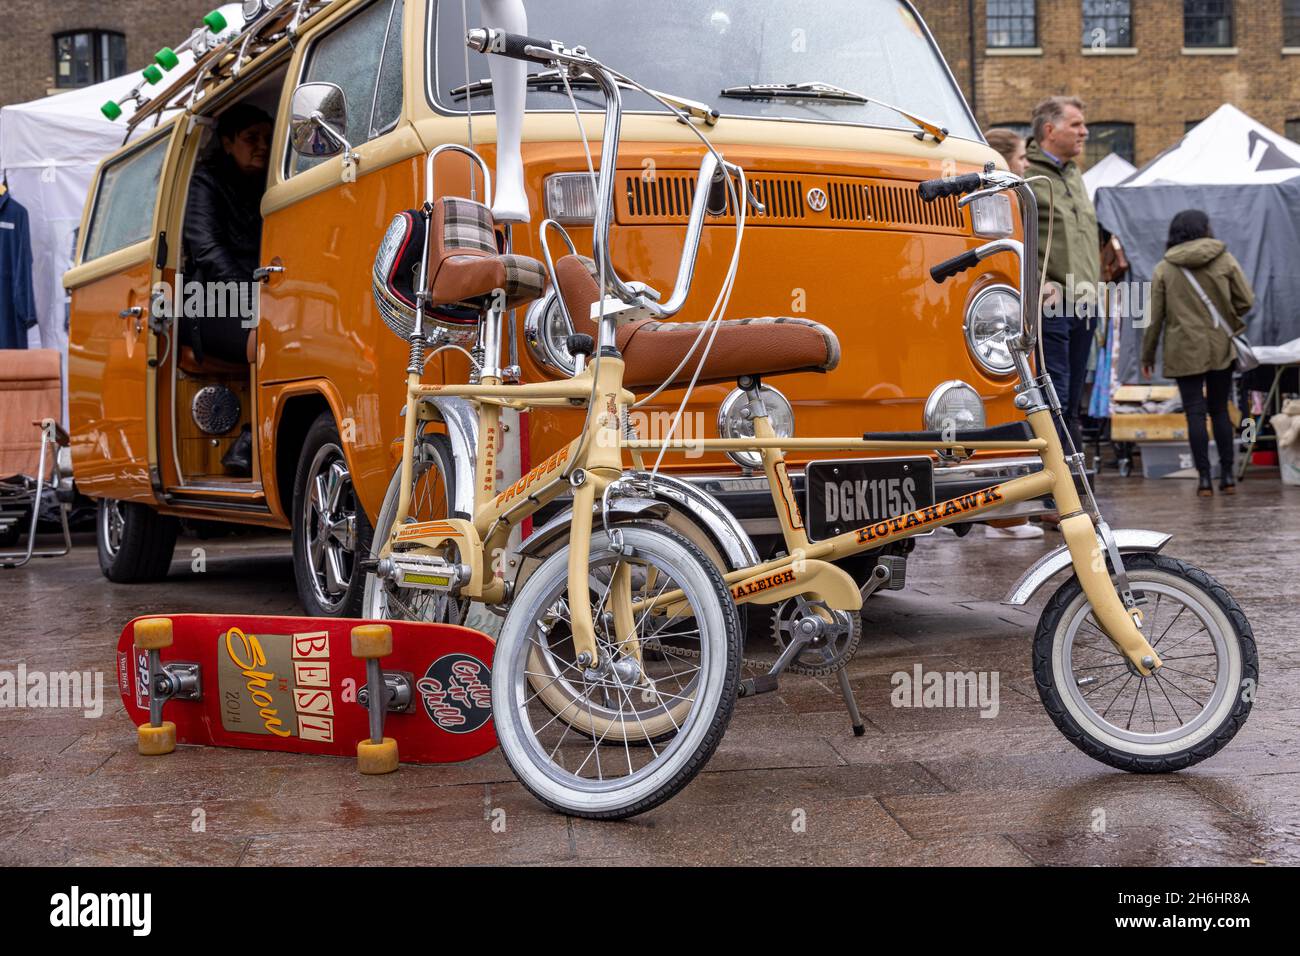 Raleigh cycles and skateboard in front of a classic VW campervan   at the London Classic Car Boot Sale, King's Cross, London, UK Stock Photo